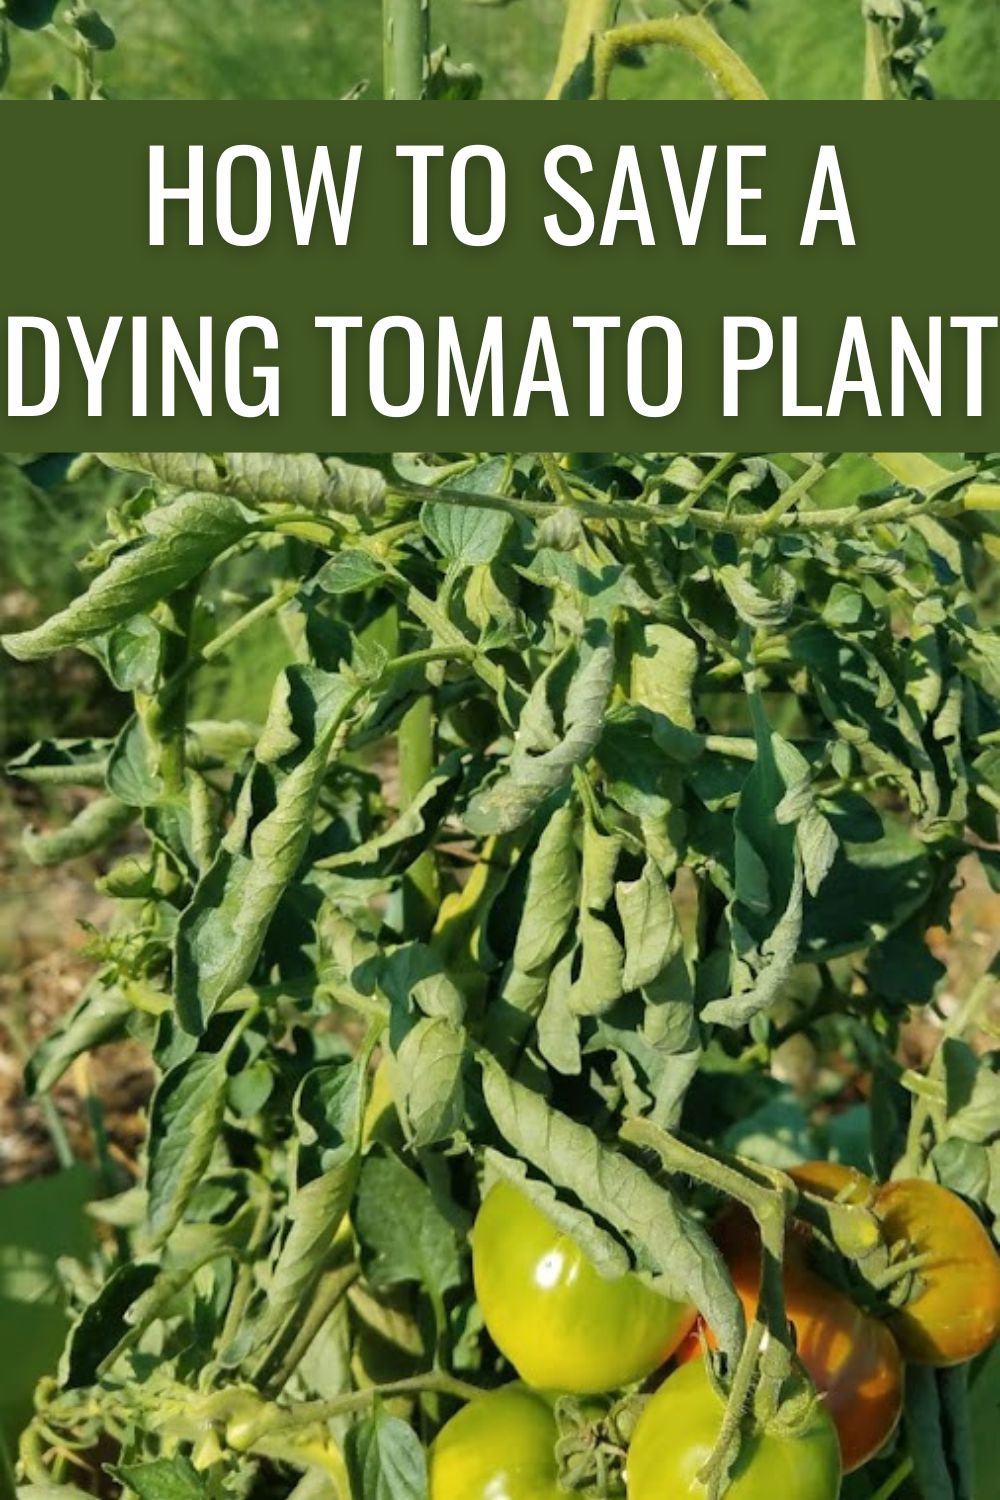 How to save a dying tomato plant.